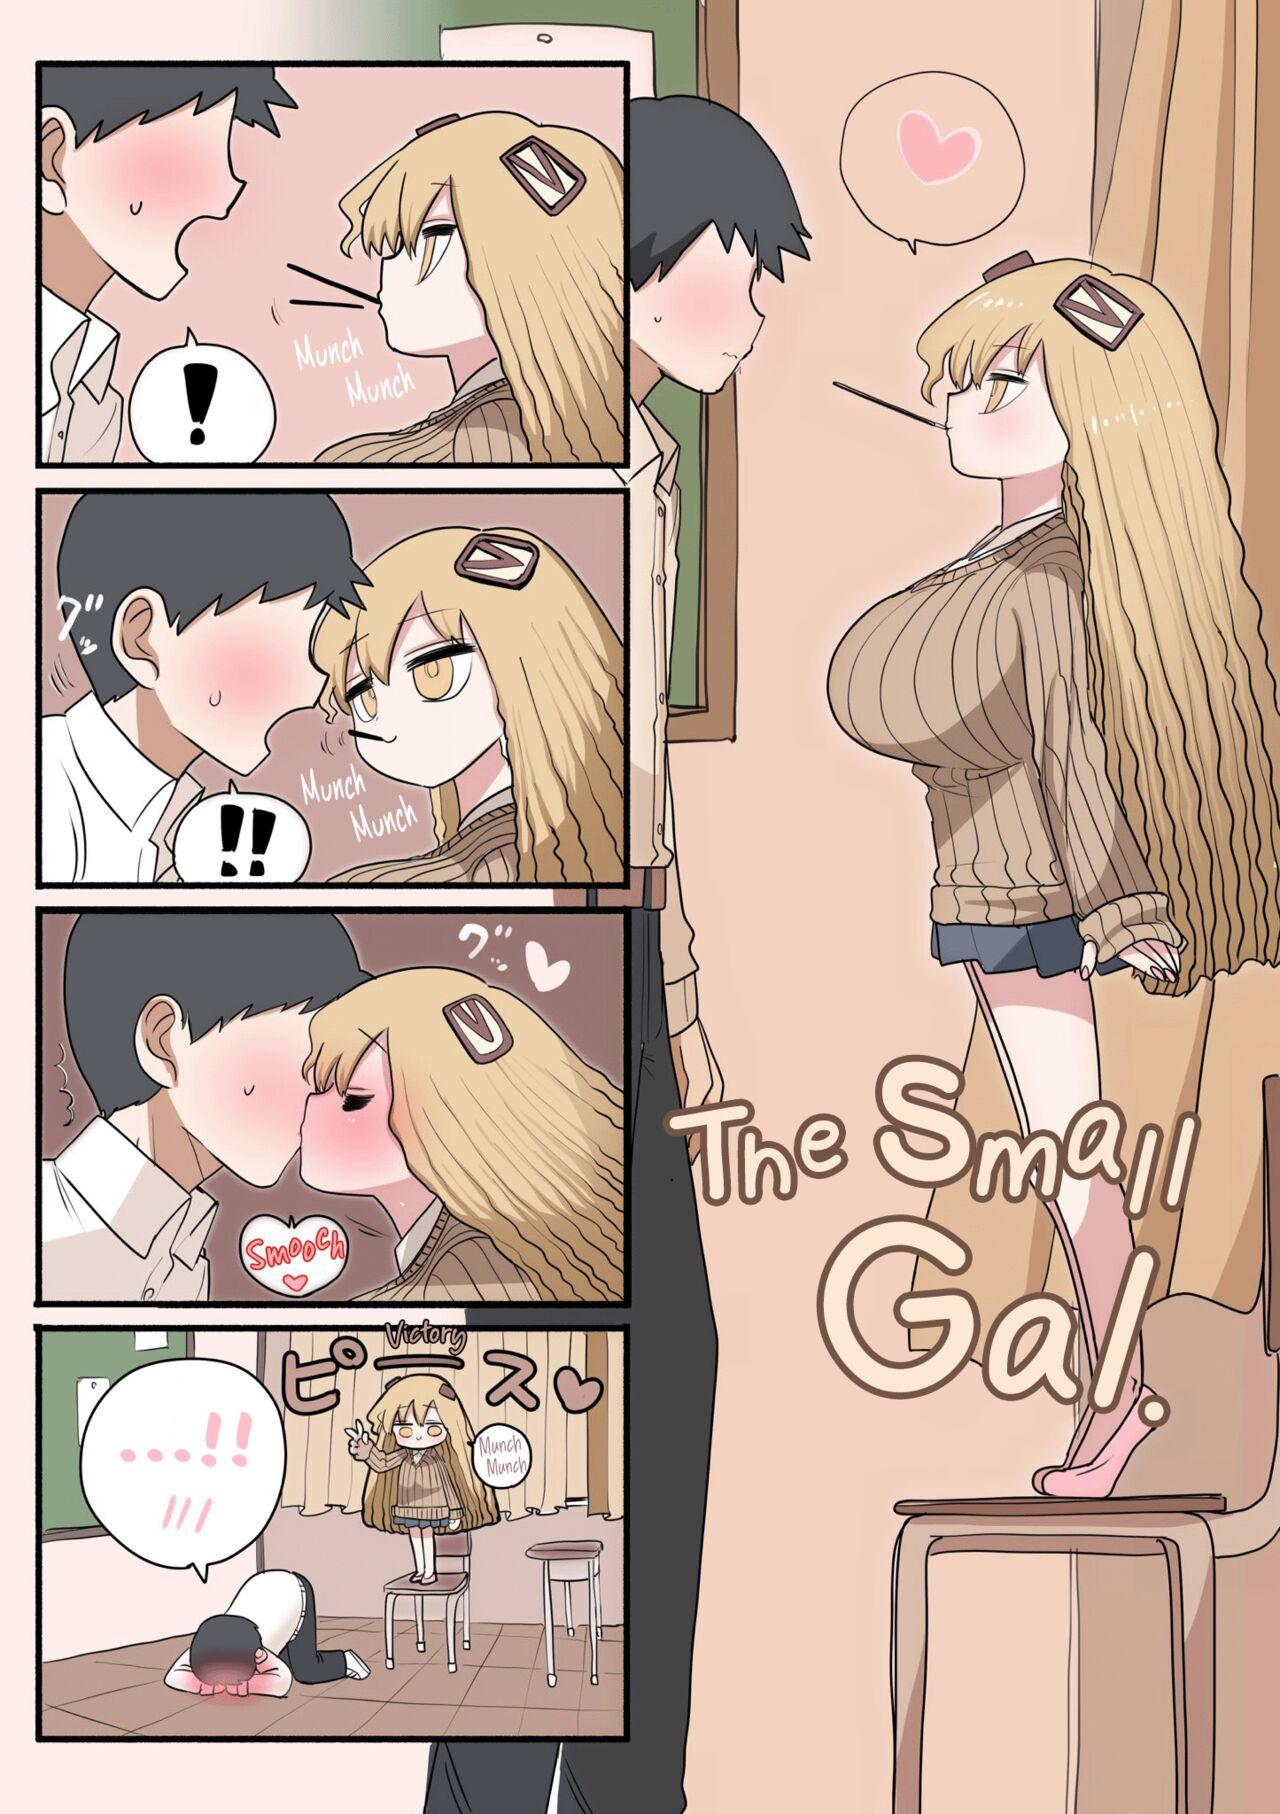 Chiisai Gal | The Small Gal 39